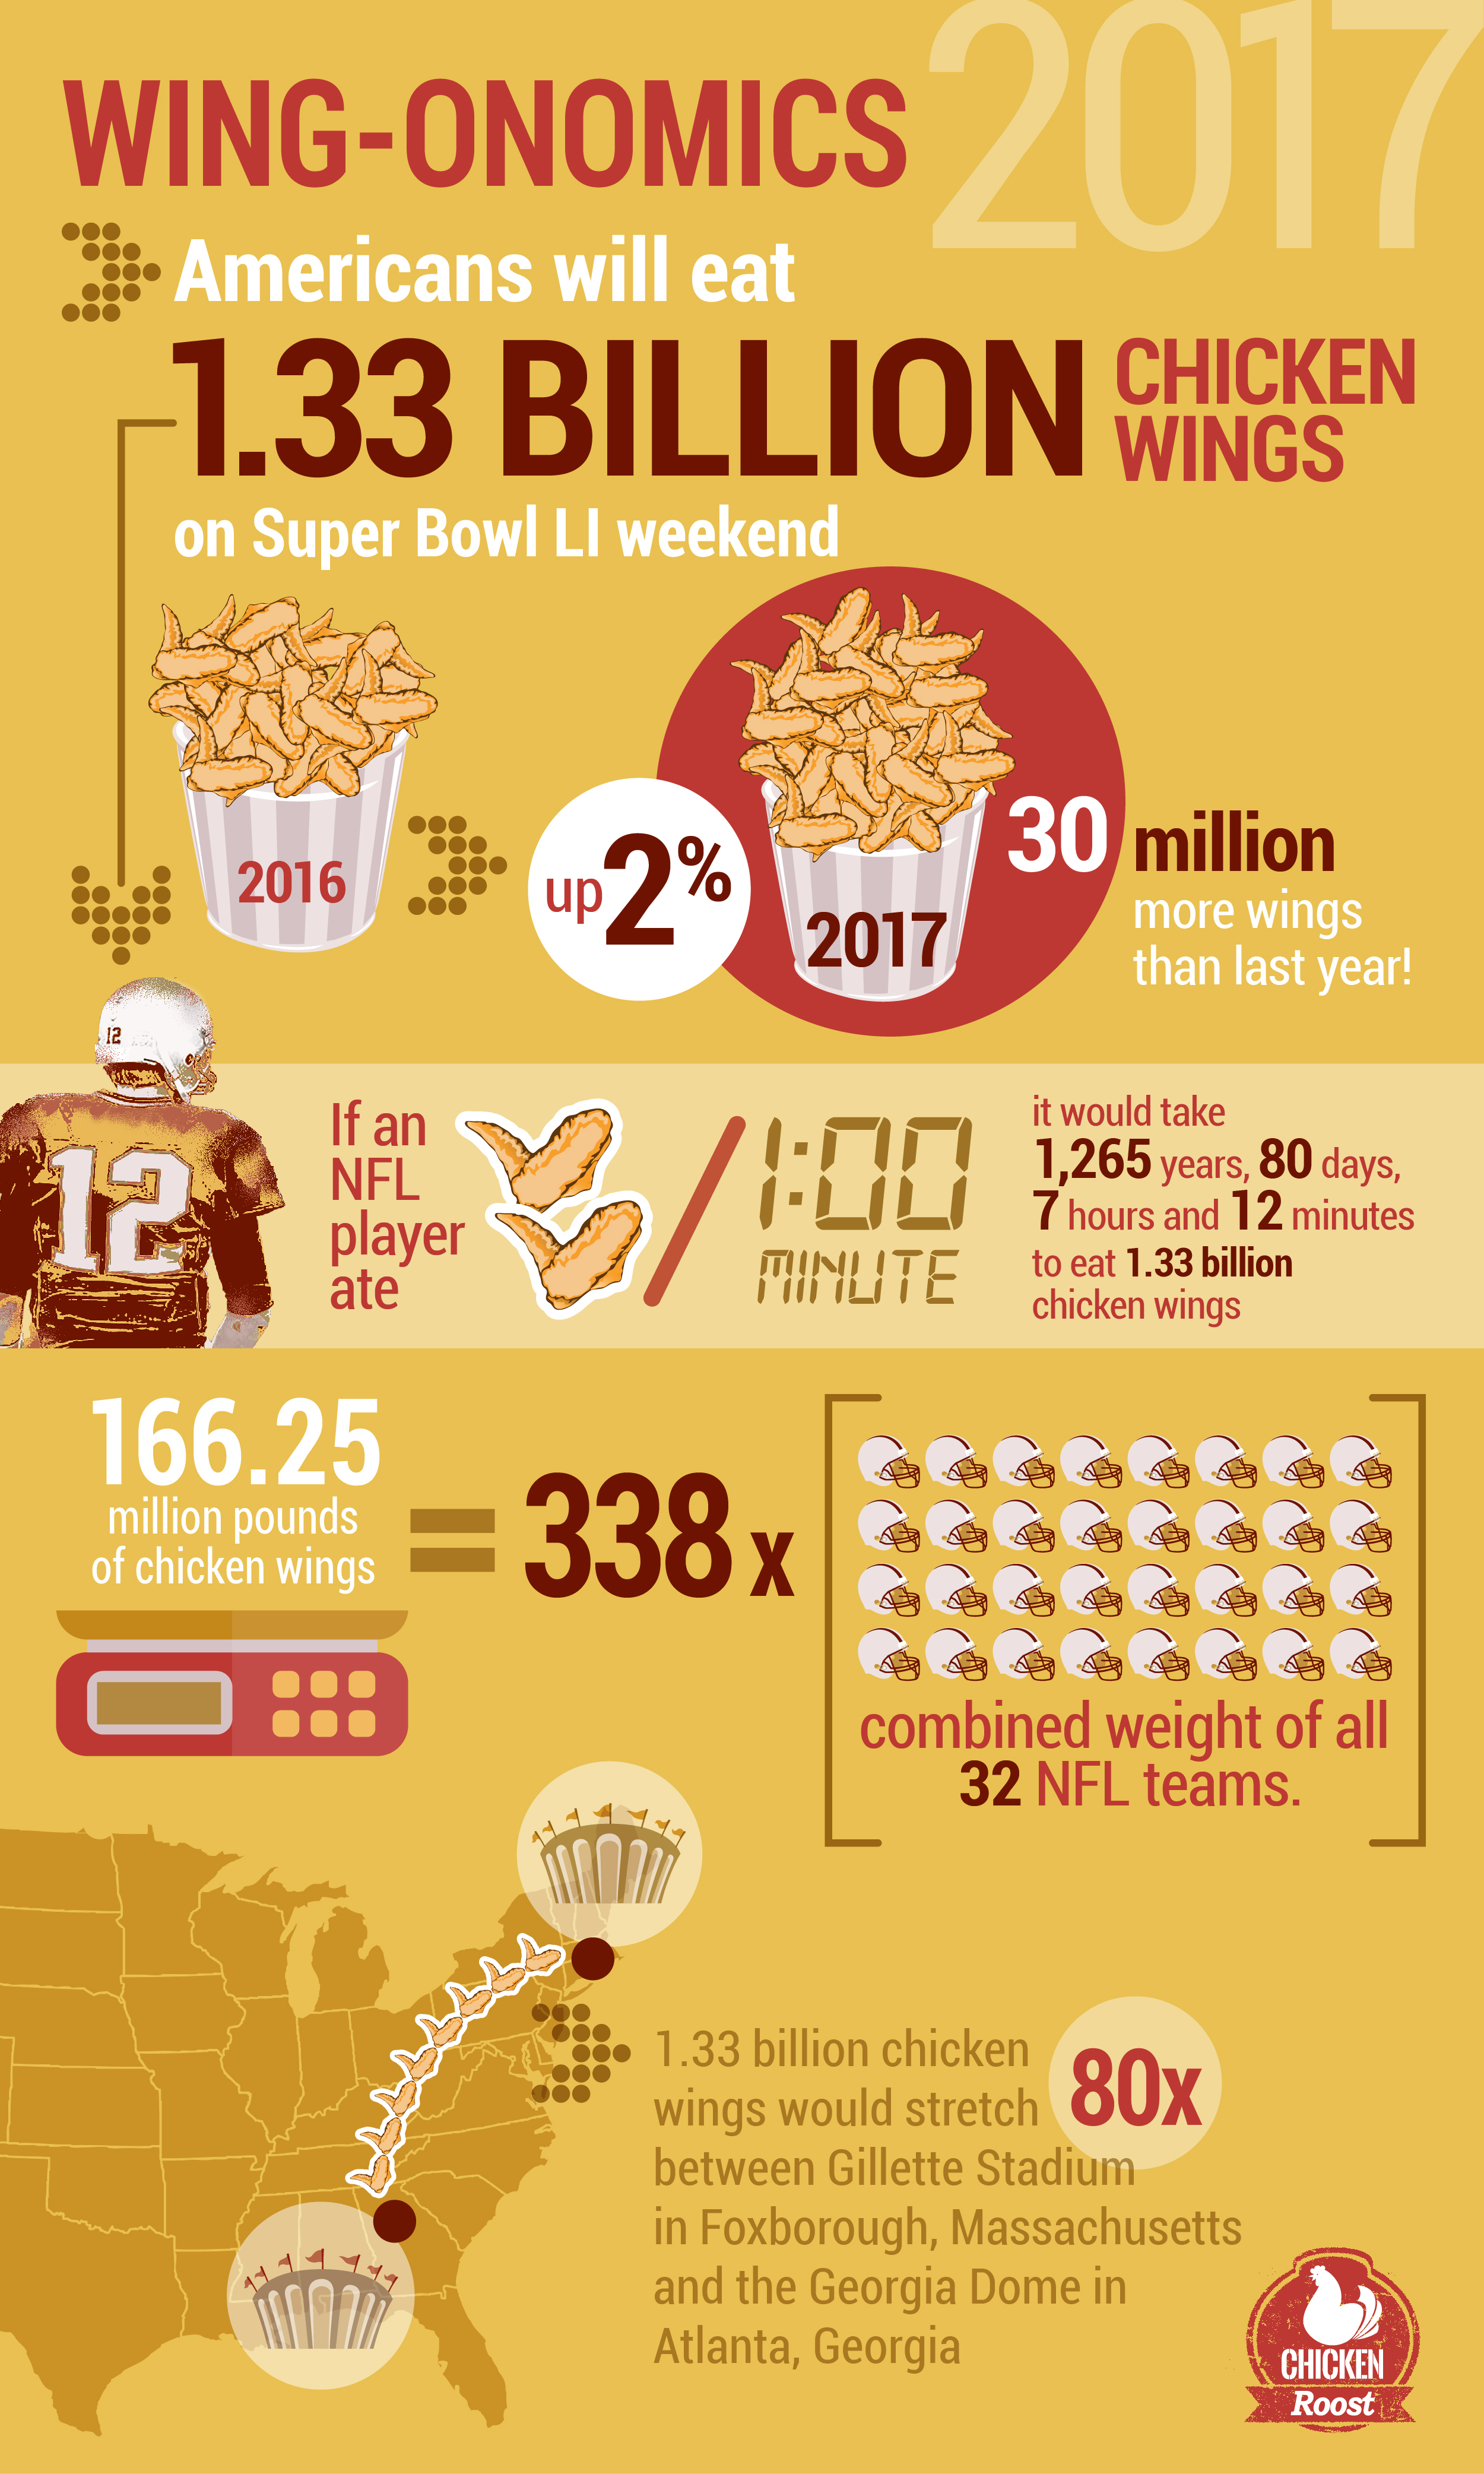 Super Bowl Sunday Second Highest Day of Food Consumption - The